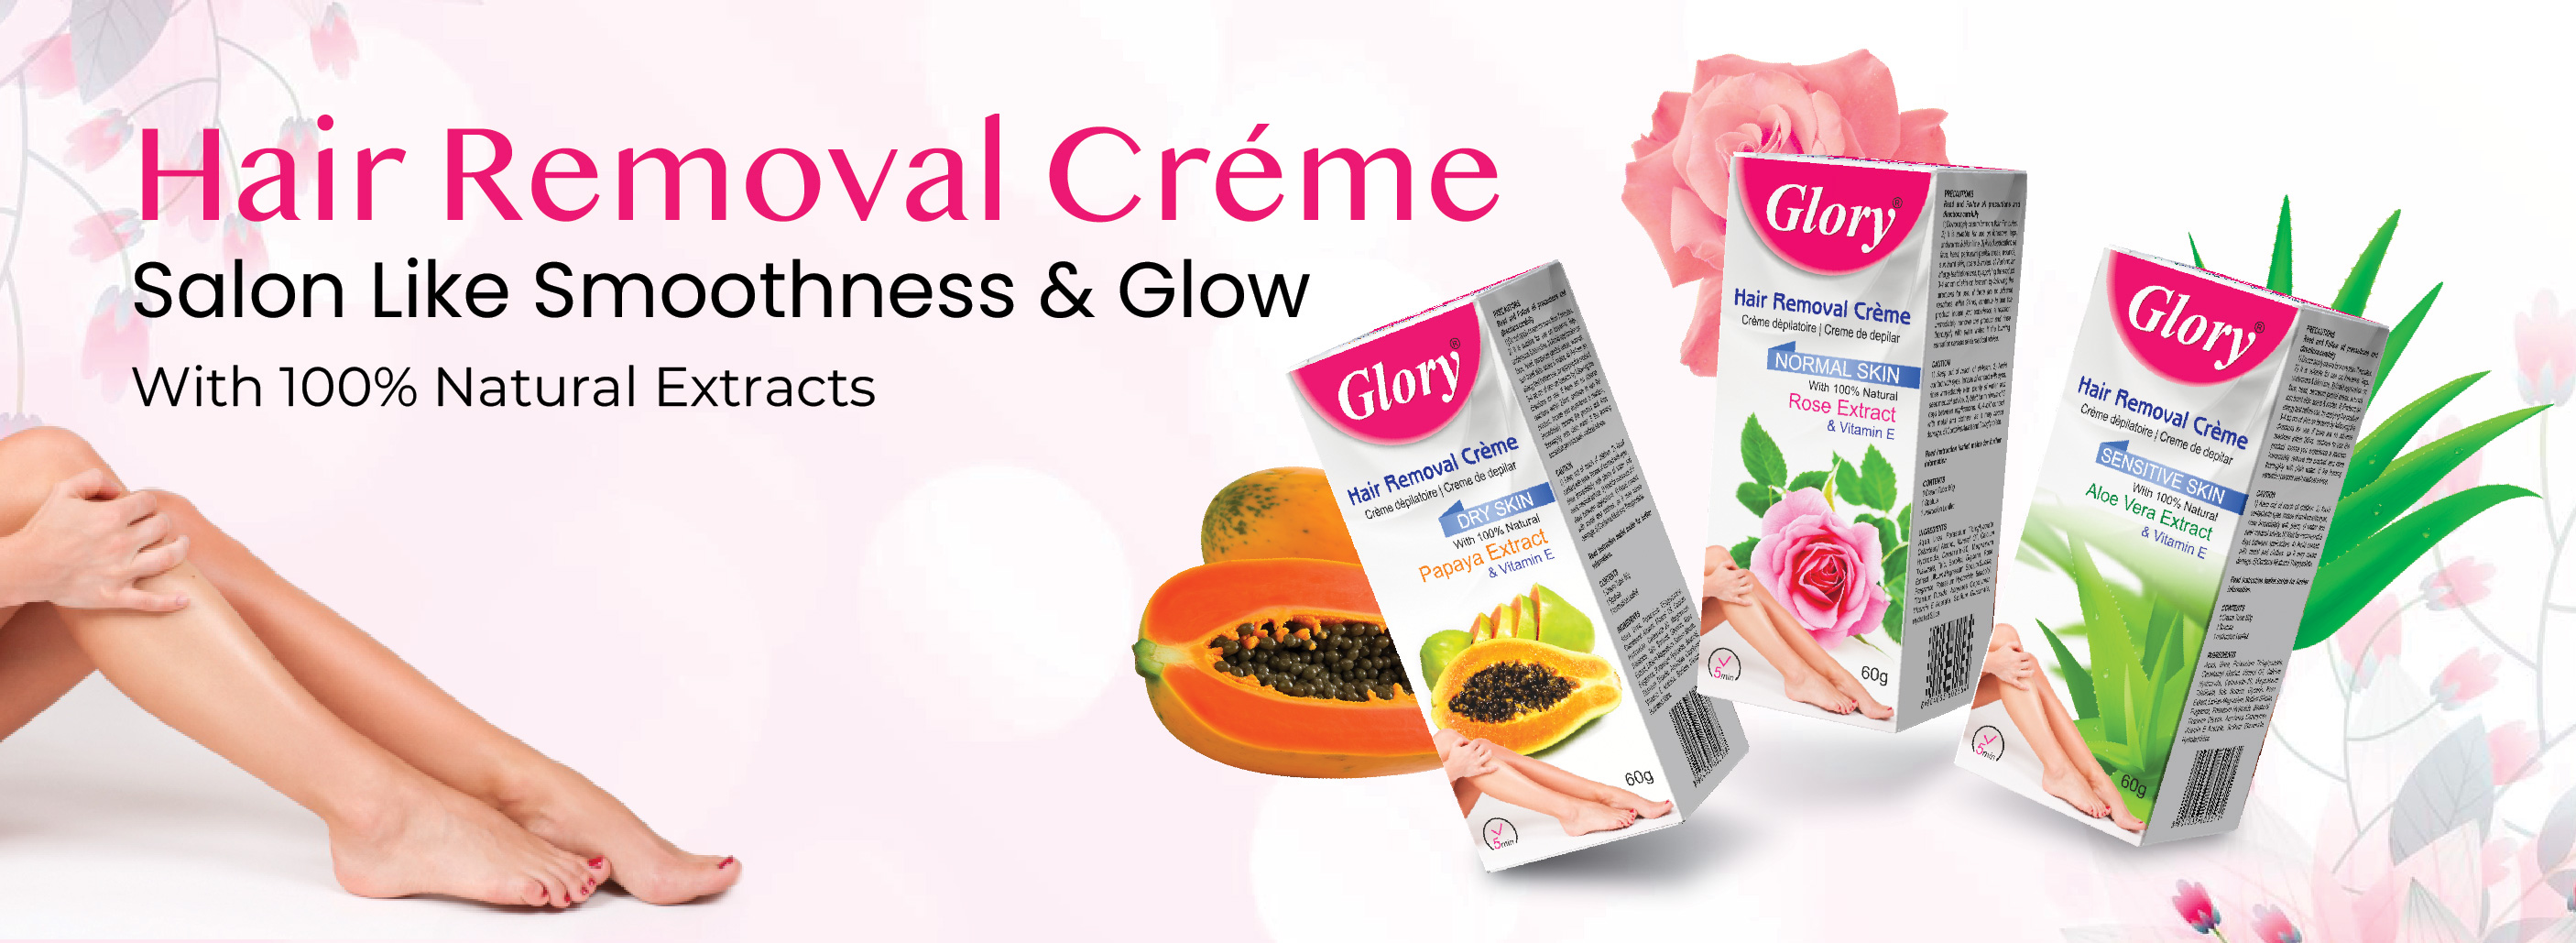 Hair Removal Creme Manufacturer | Hair Removal Creme Manufacturer in South Africa